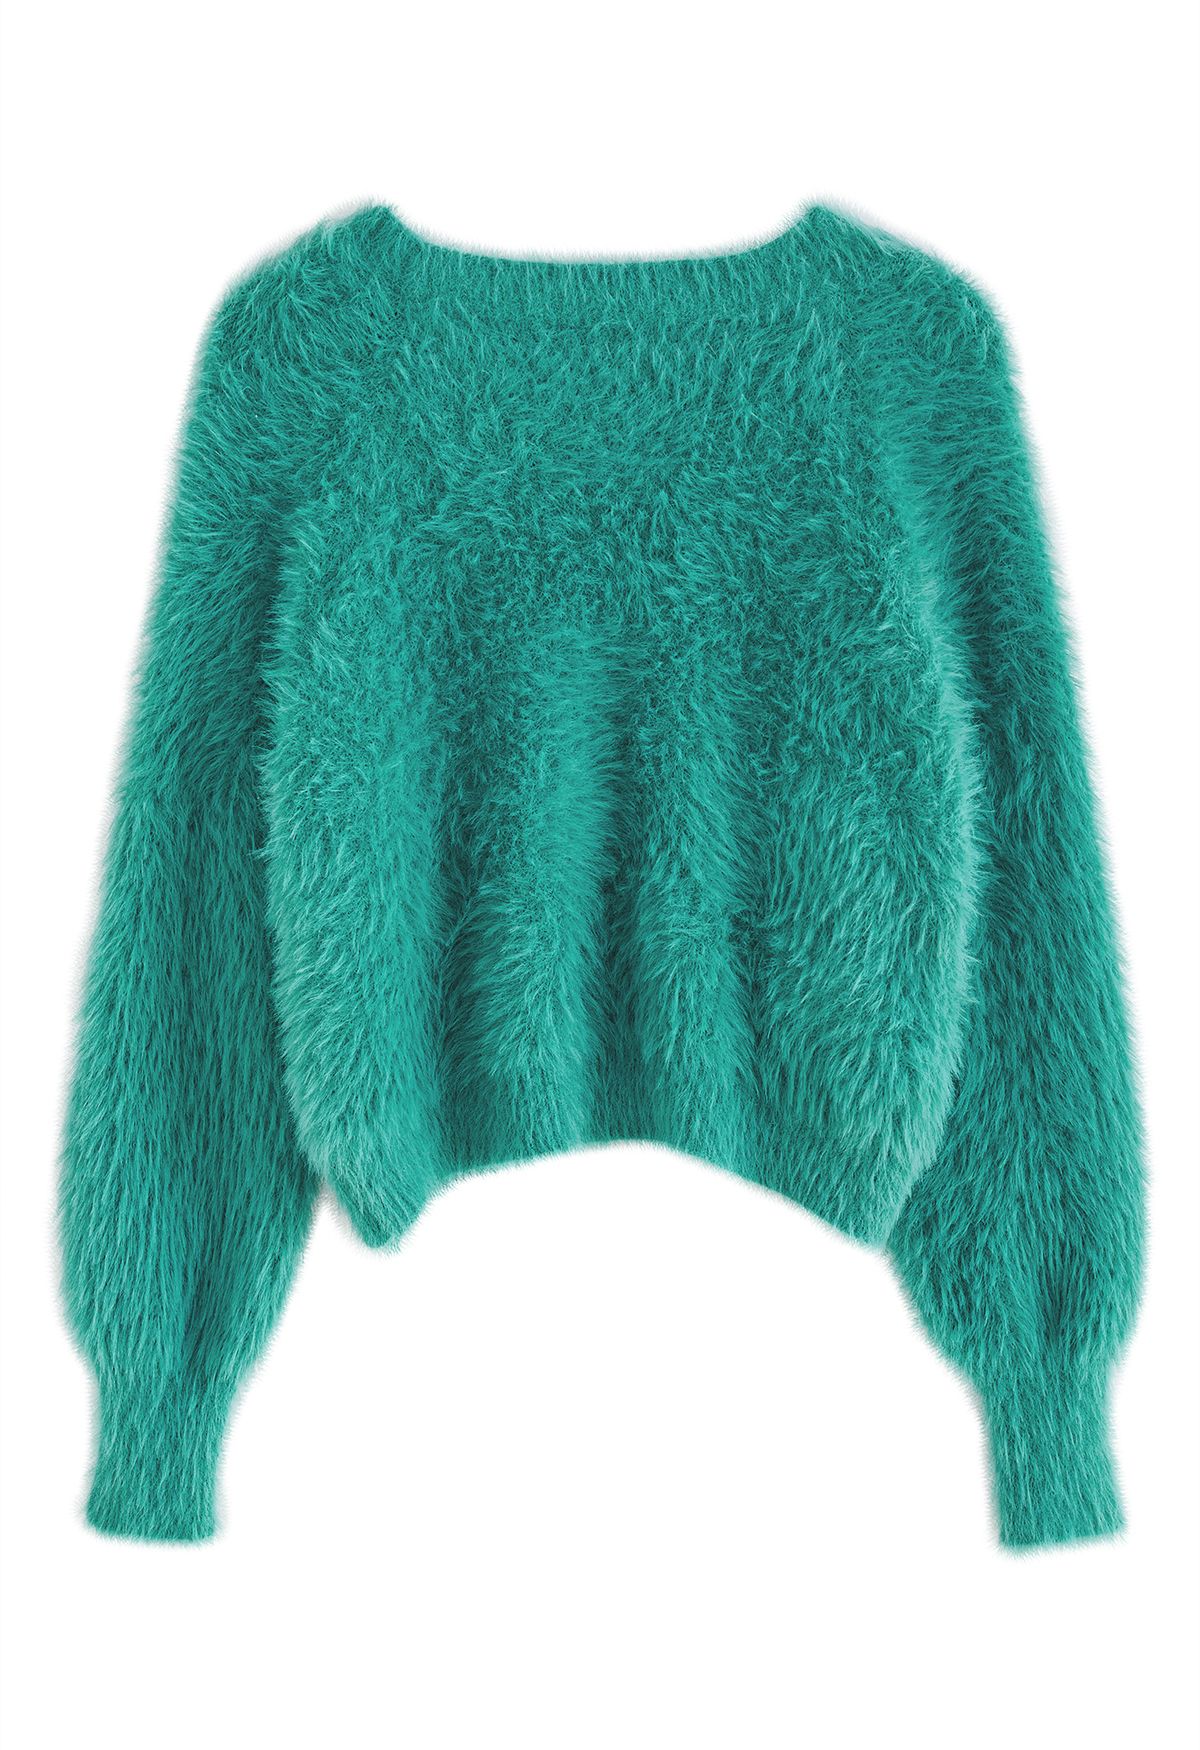 Fuzzy Cami Top and Pearly Buttoned Cardigan Set in Turquoise